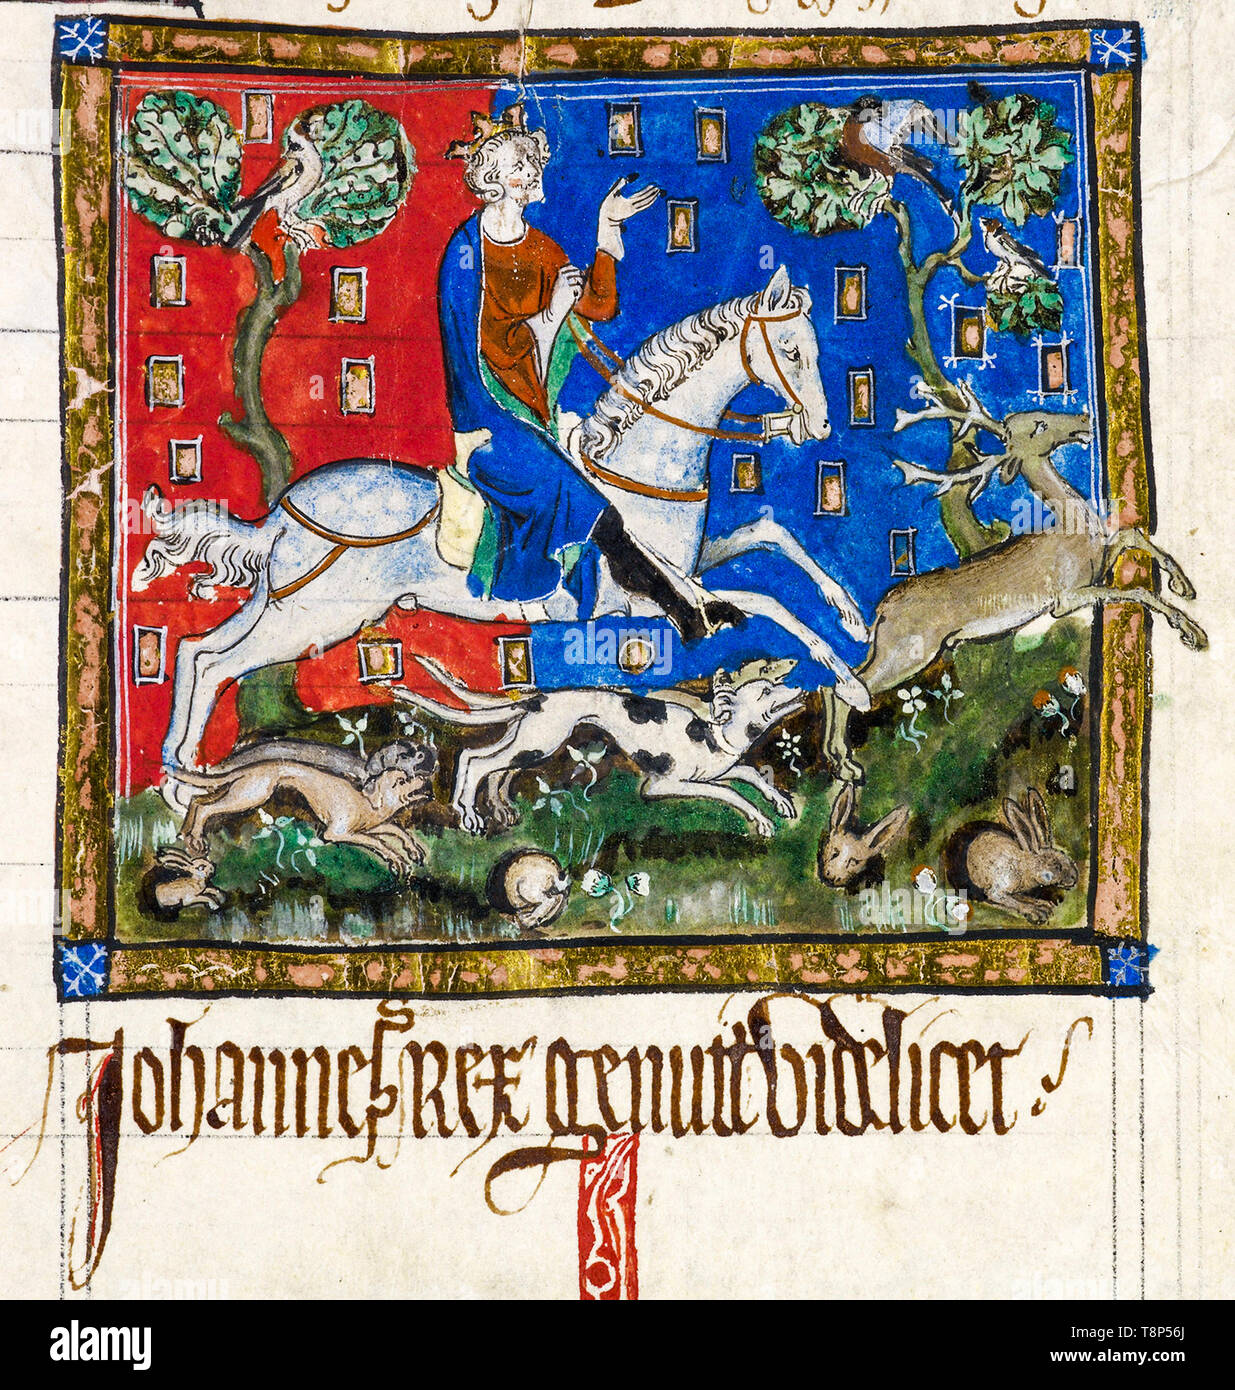 King John hunting a stag with hounds, 14th century, illustrated manuscript Stock Photo